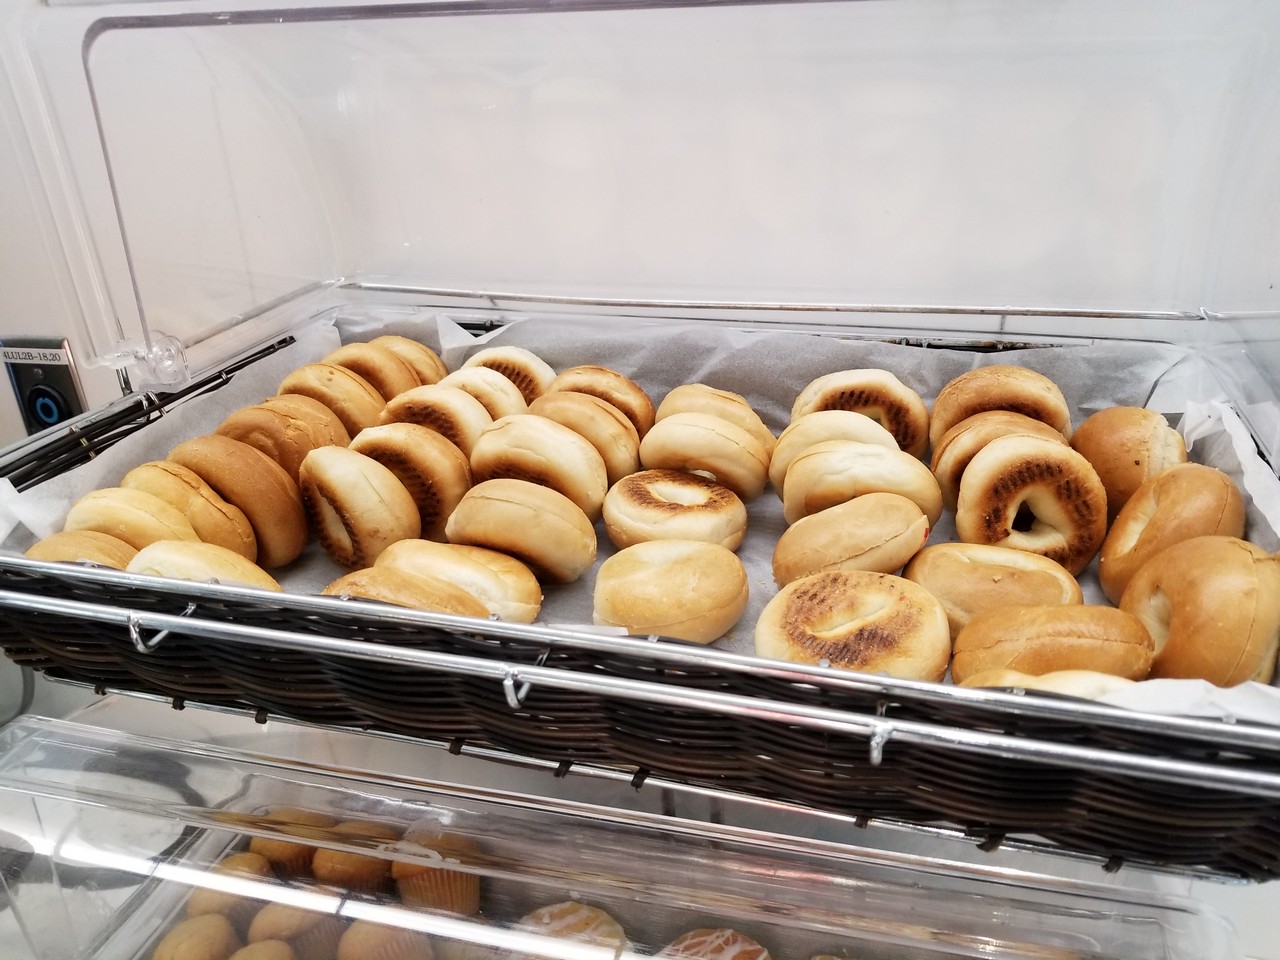 a tray of pastries in a refrigerator